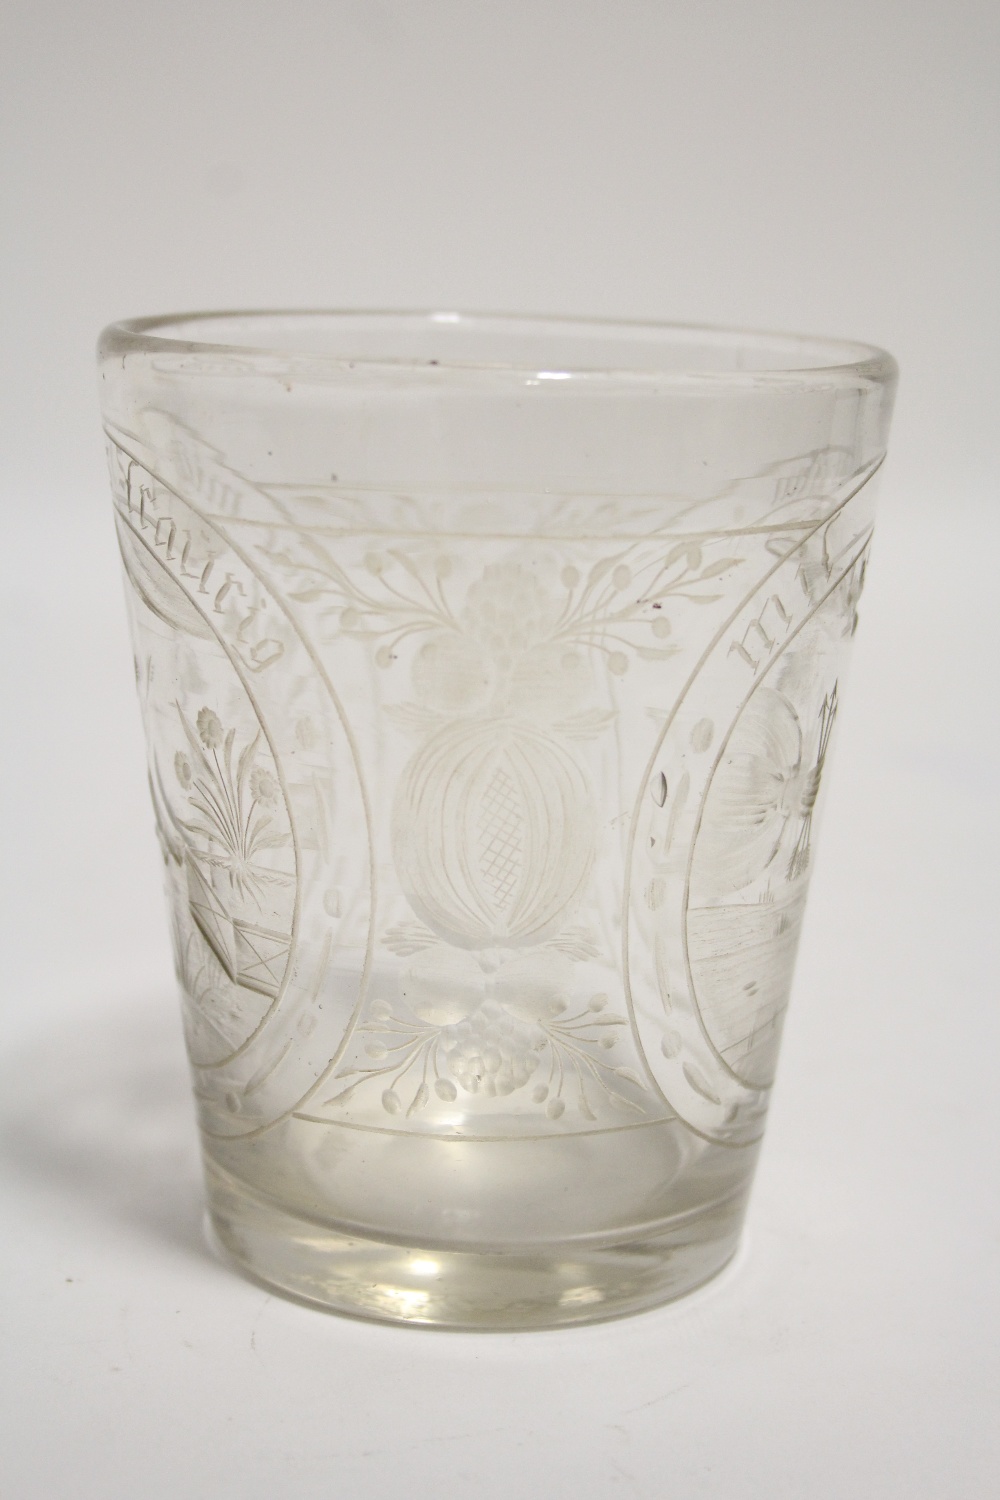 AN 18th Century GERMAN GLASS FUNNEL-SHAPED BEAKER with intaglio engraved heraldic device to one side - Image 8 of 10